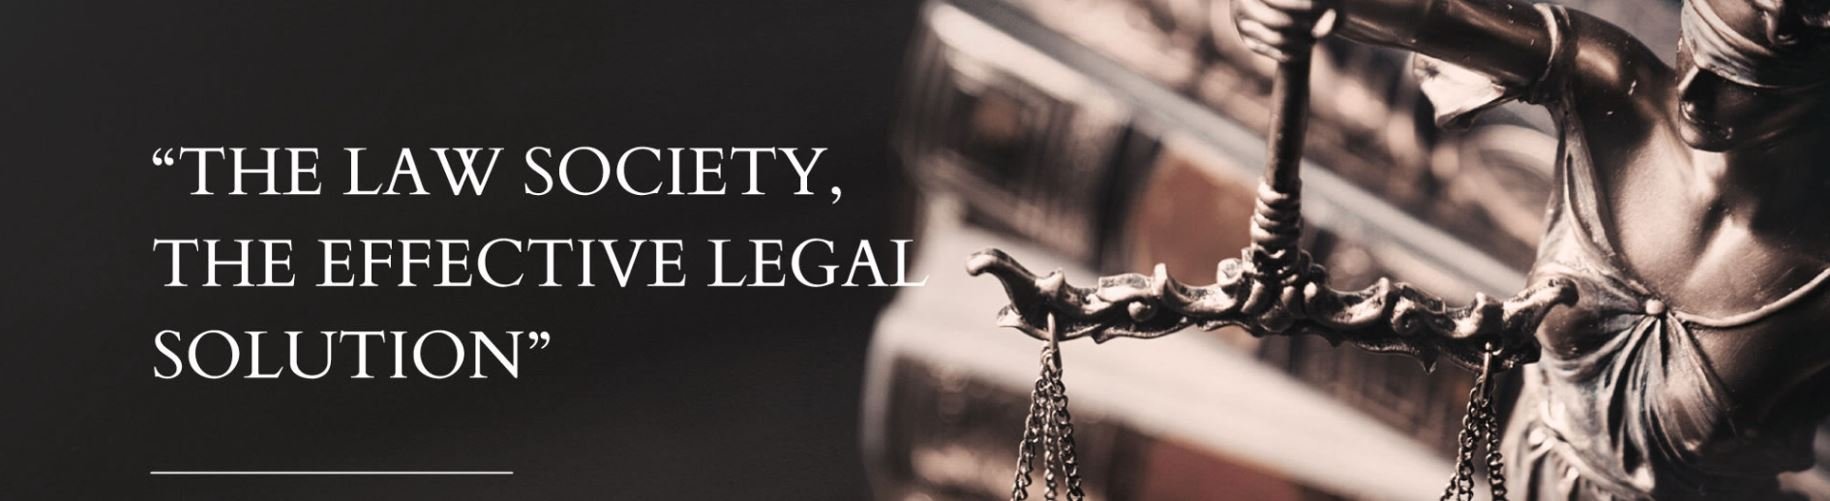 The Law Society Co.Ltd. cover photo